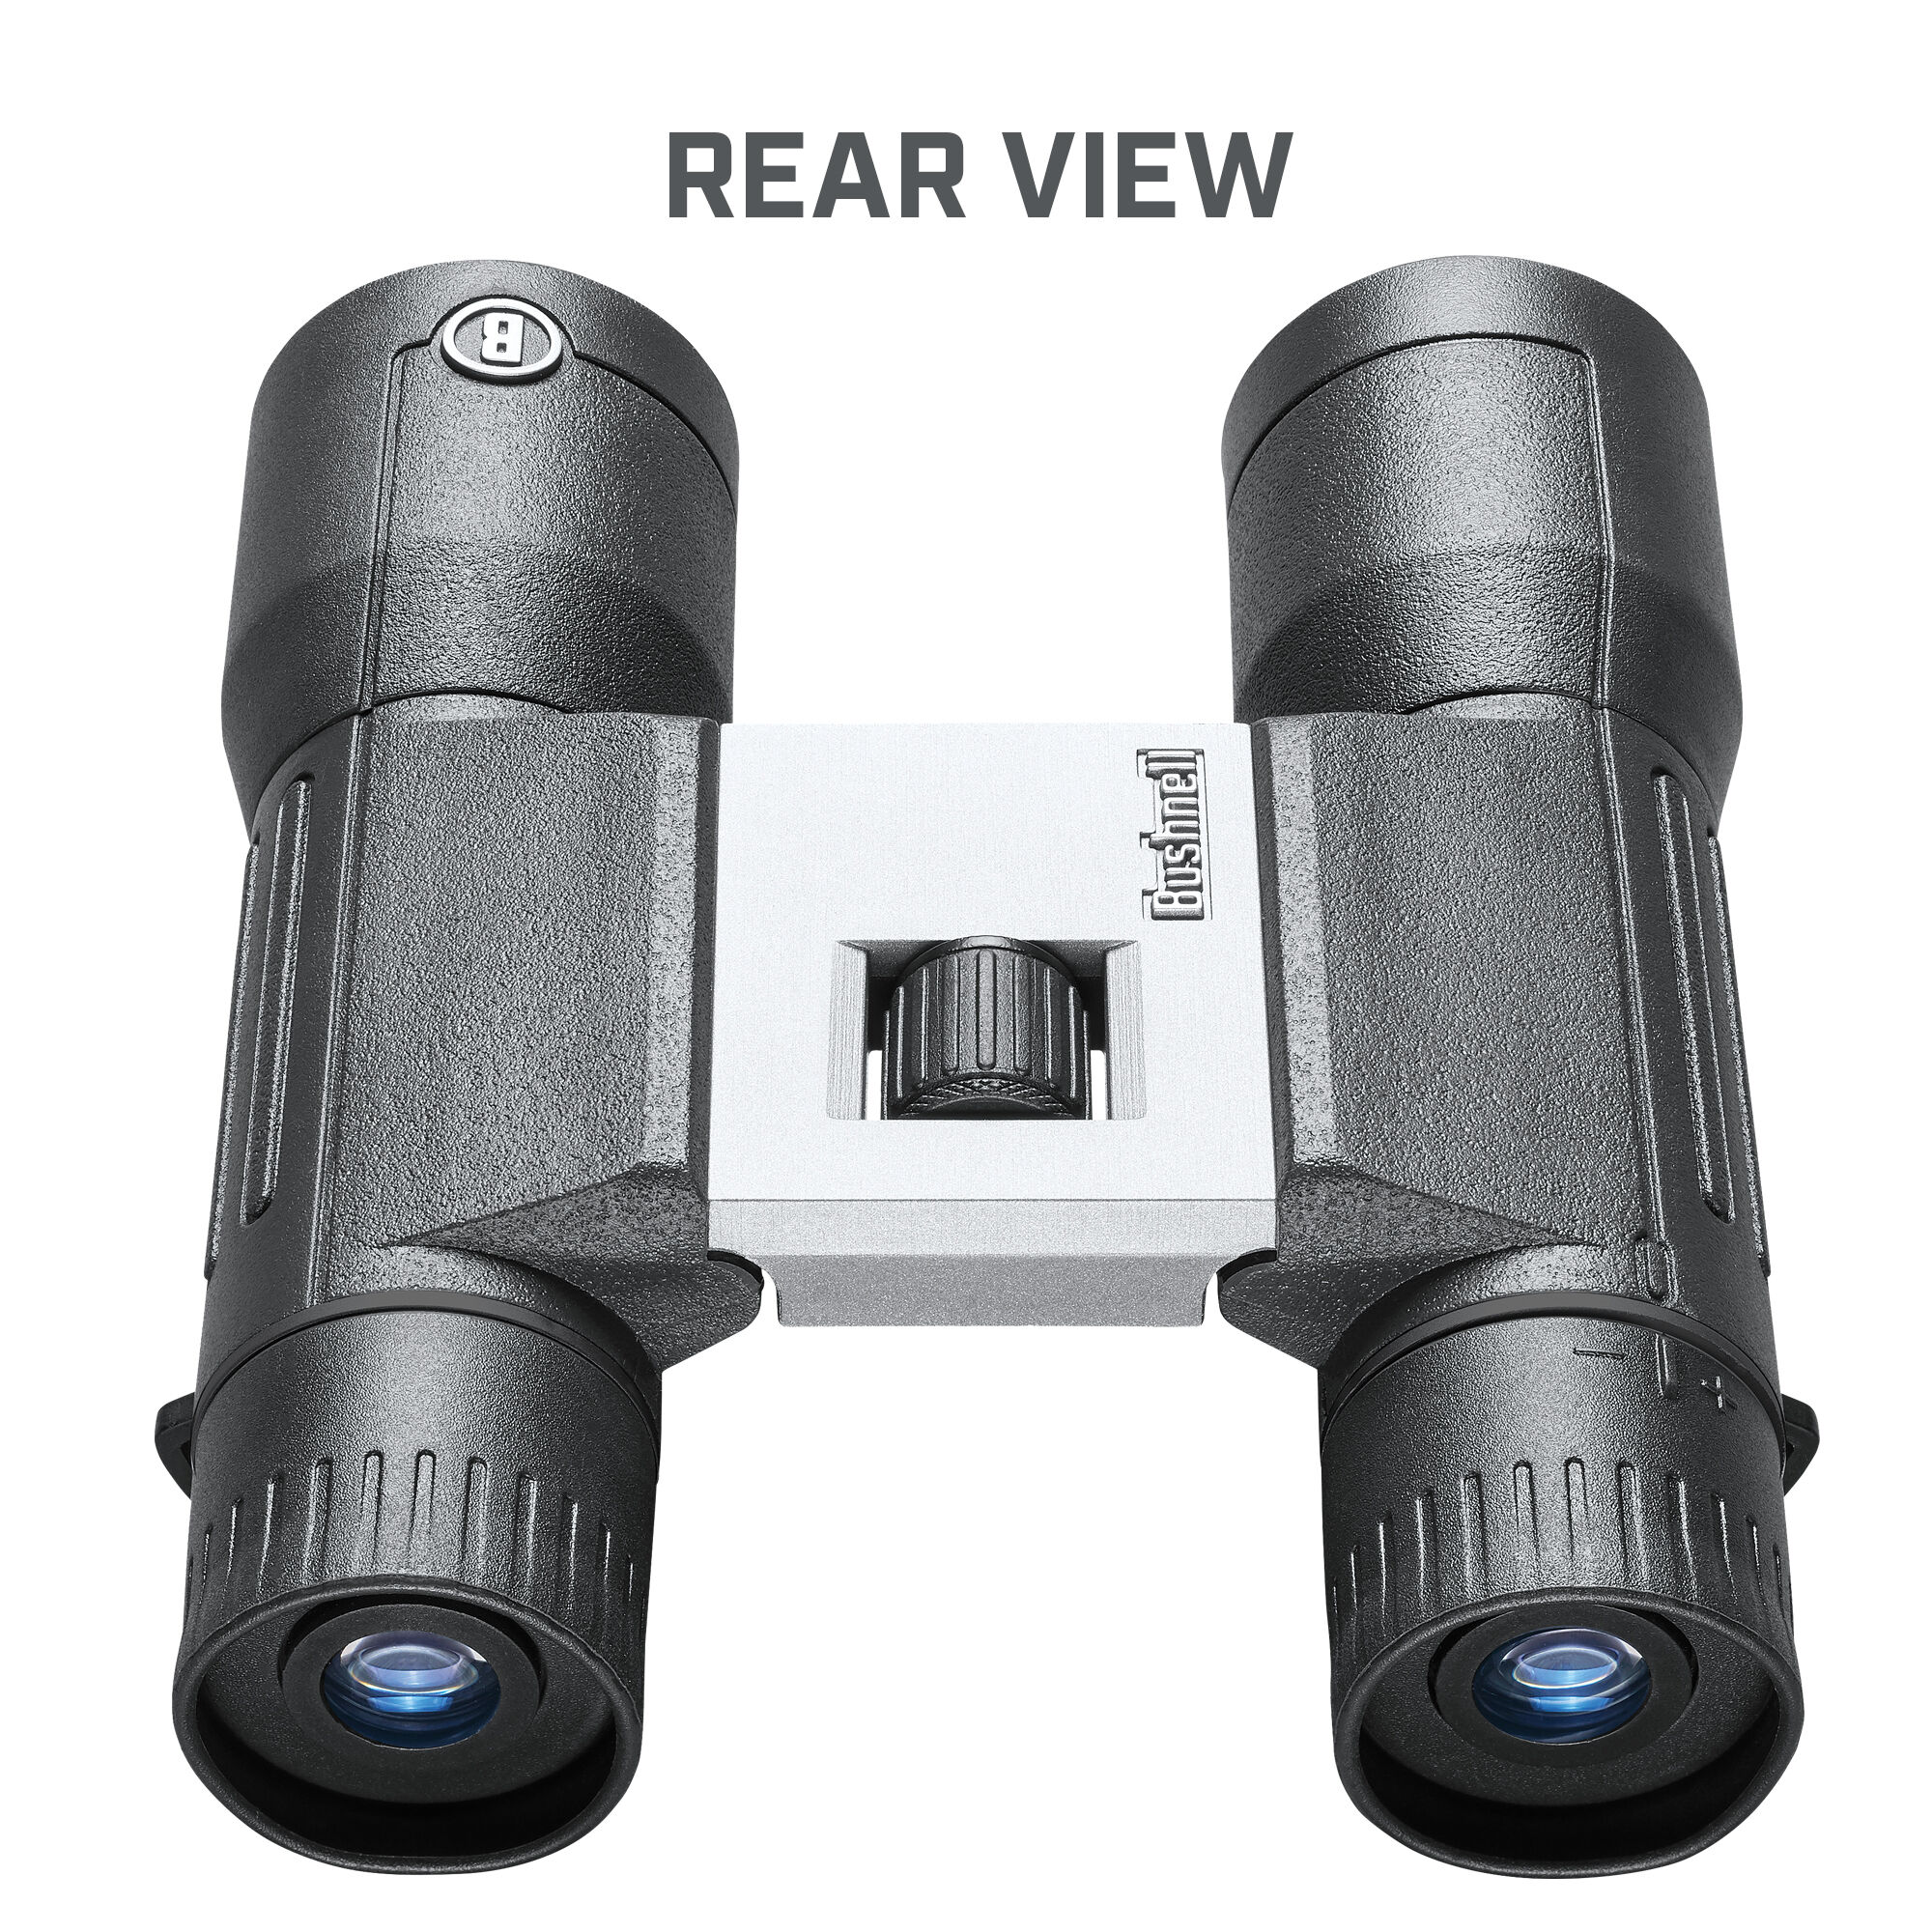 Powerview 2 Compact Binoculars, 16x32 Magnification| Bushnell